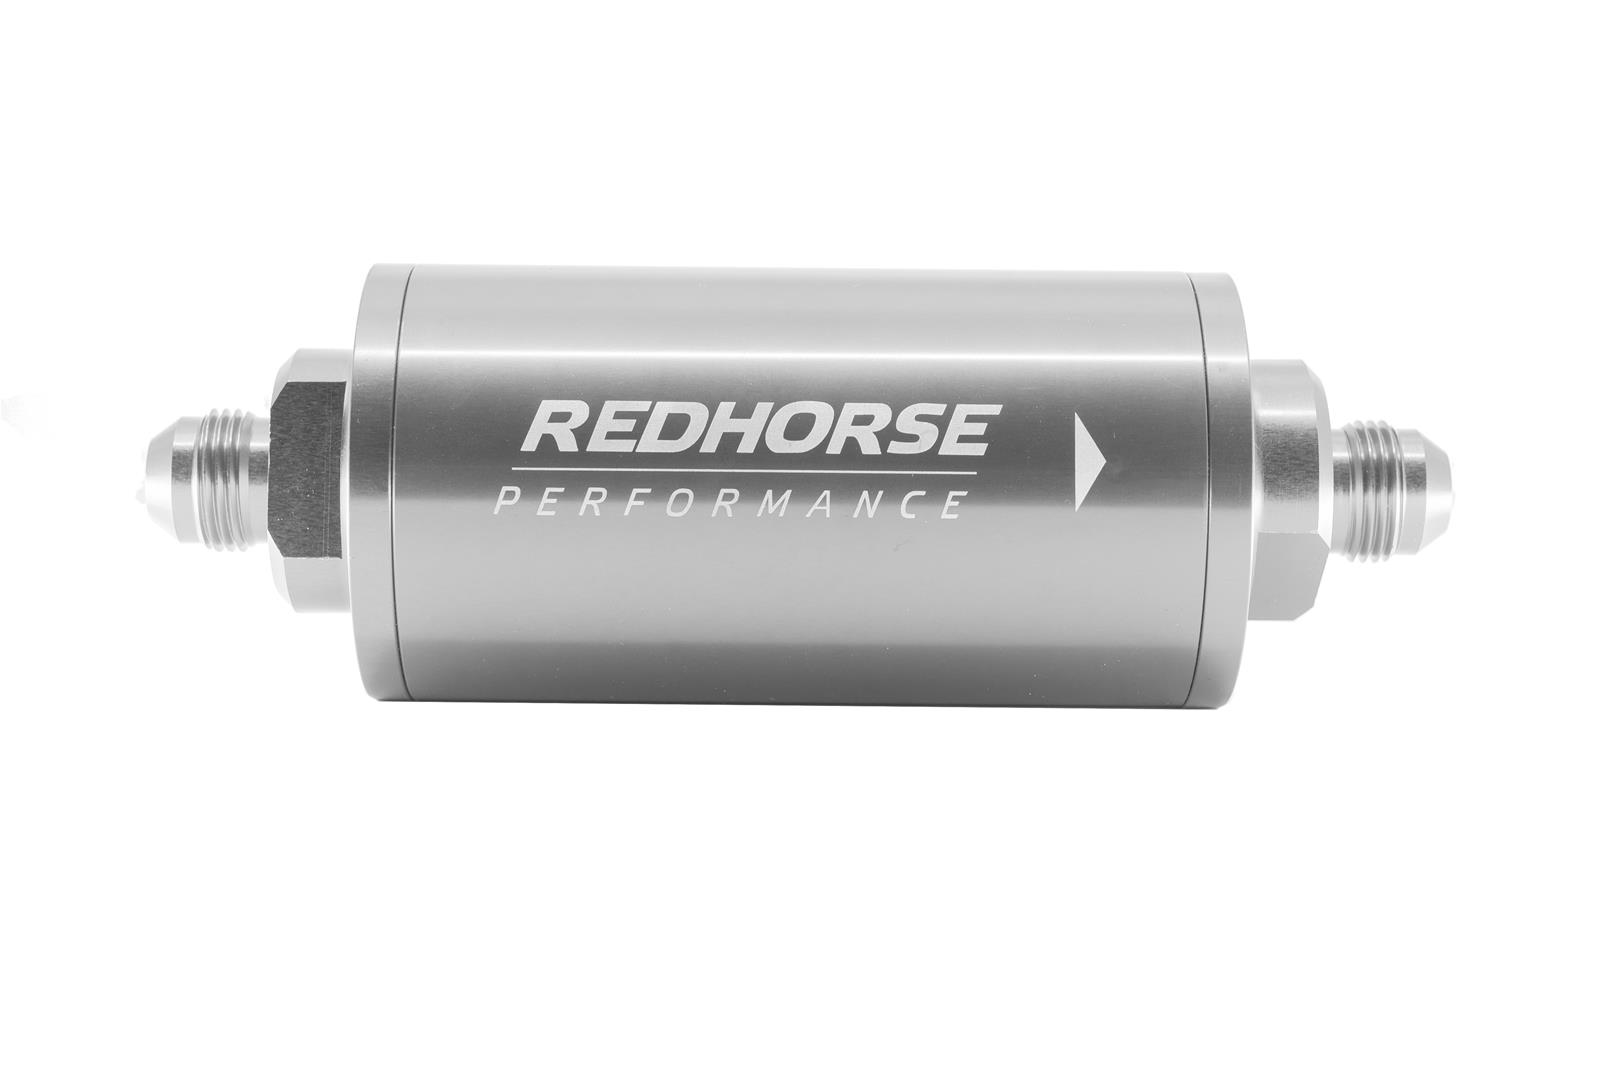 Redhorse Performance 4651-12-5-100 6in Cylindrical In-Line Race Fuel Filter w/ 100 Micron S.S. element - 12 AN